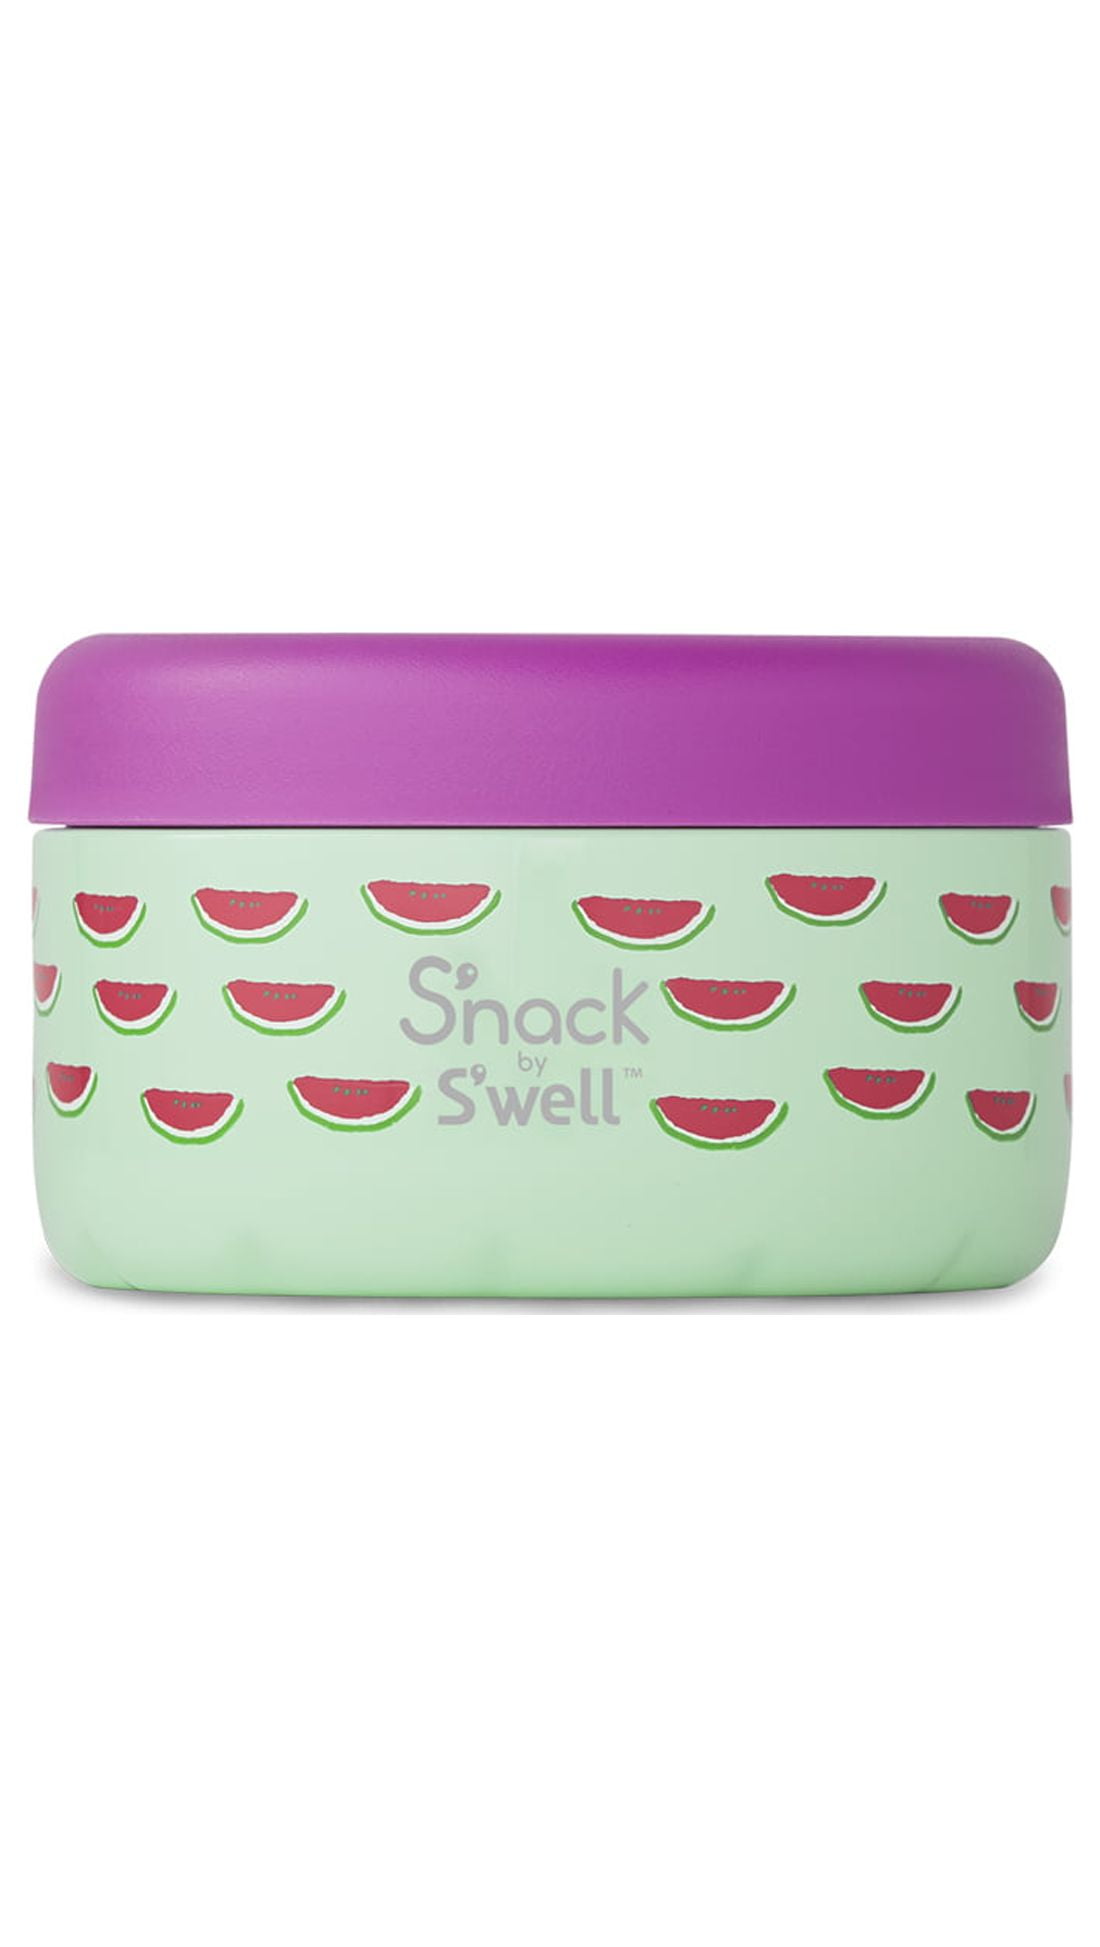 S'nack by S'well Jelly Bean Vacuum-Insulated Stainless Steel Food